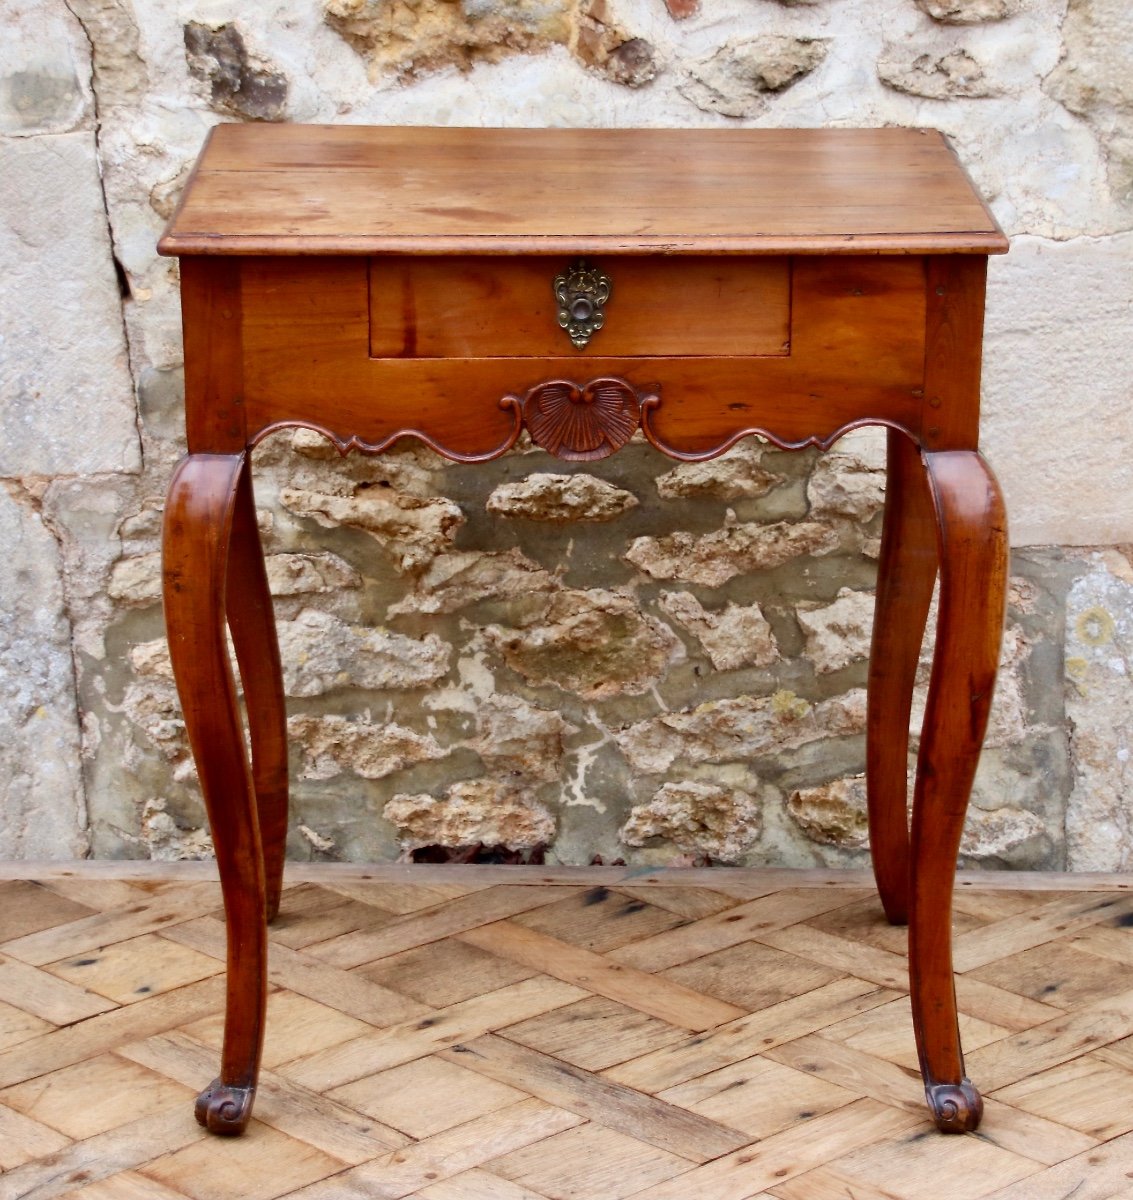 18th Century Provençal Writing Table In Cherry-photo-6